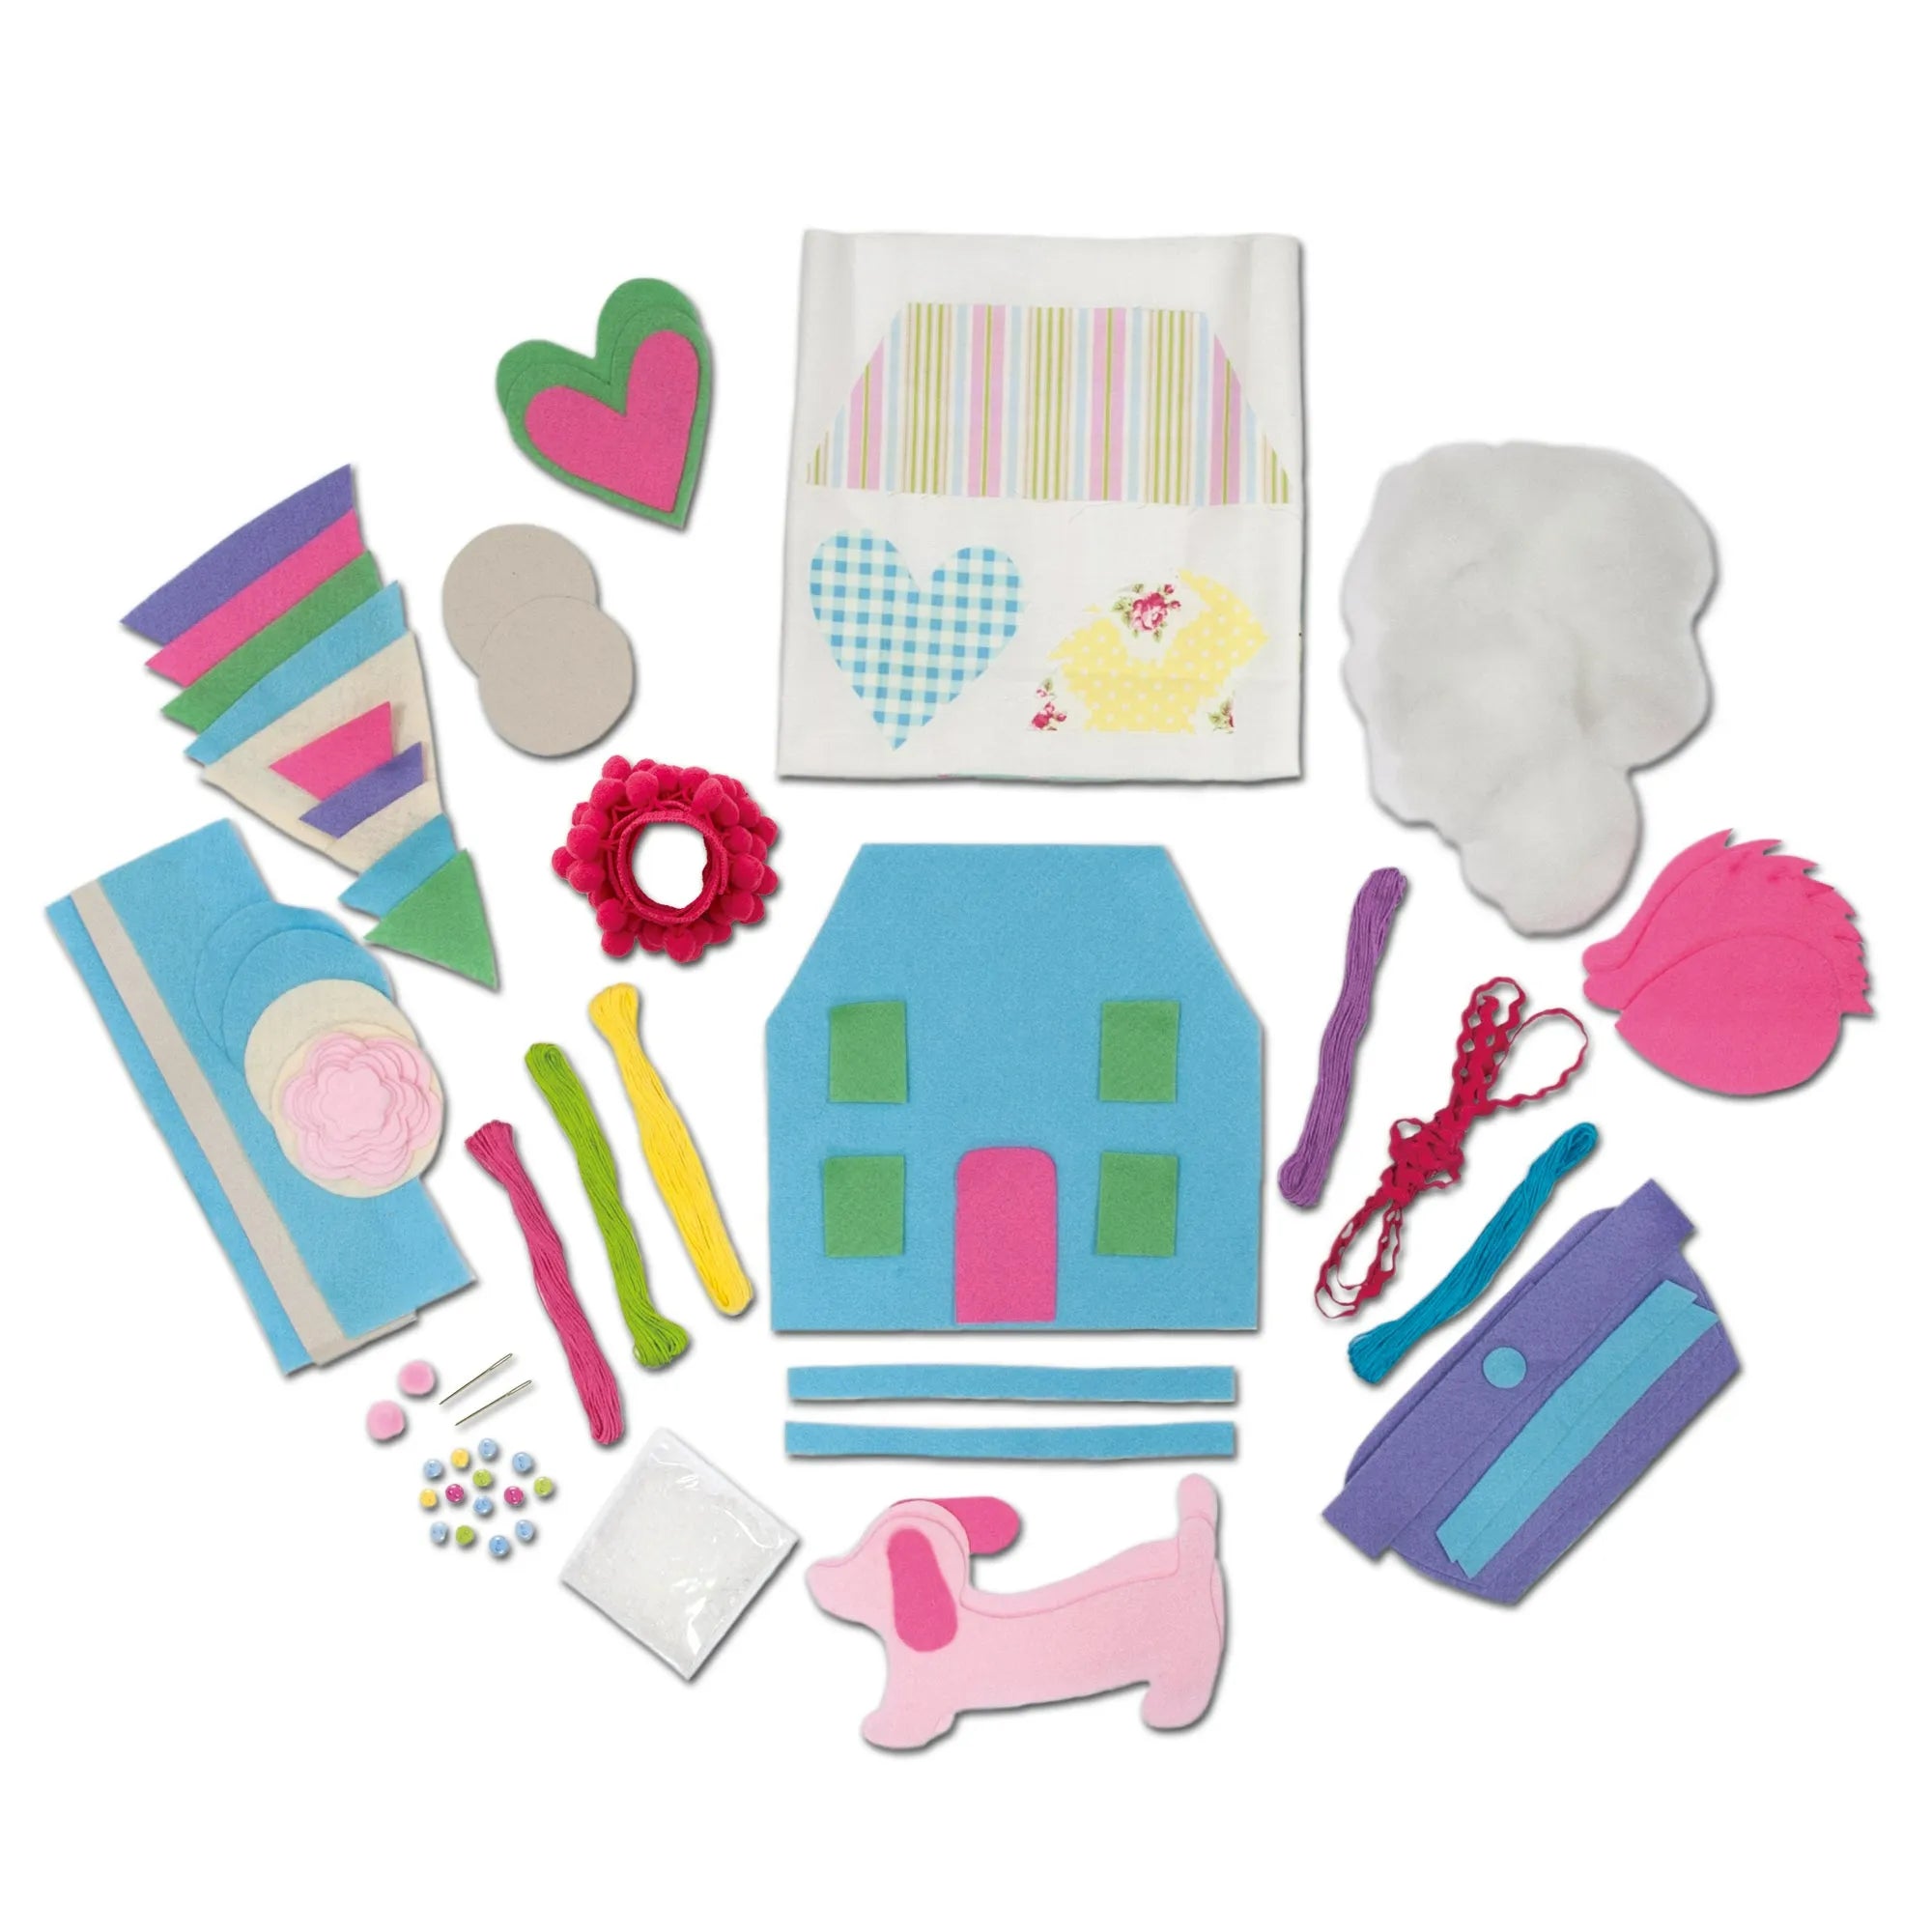 contents view - galt toys sewing case - creative sets for kids